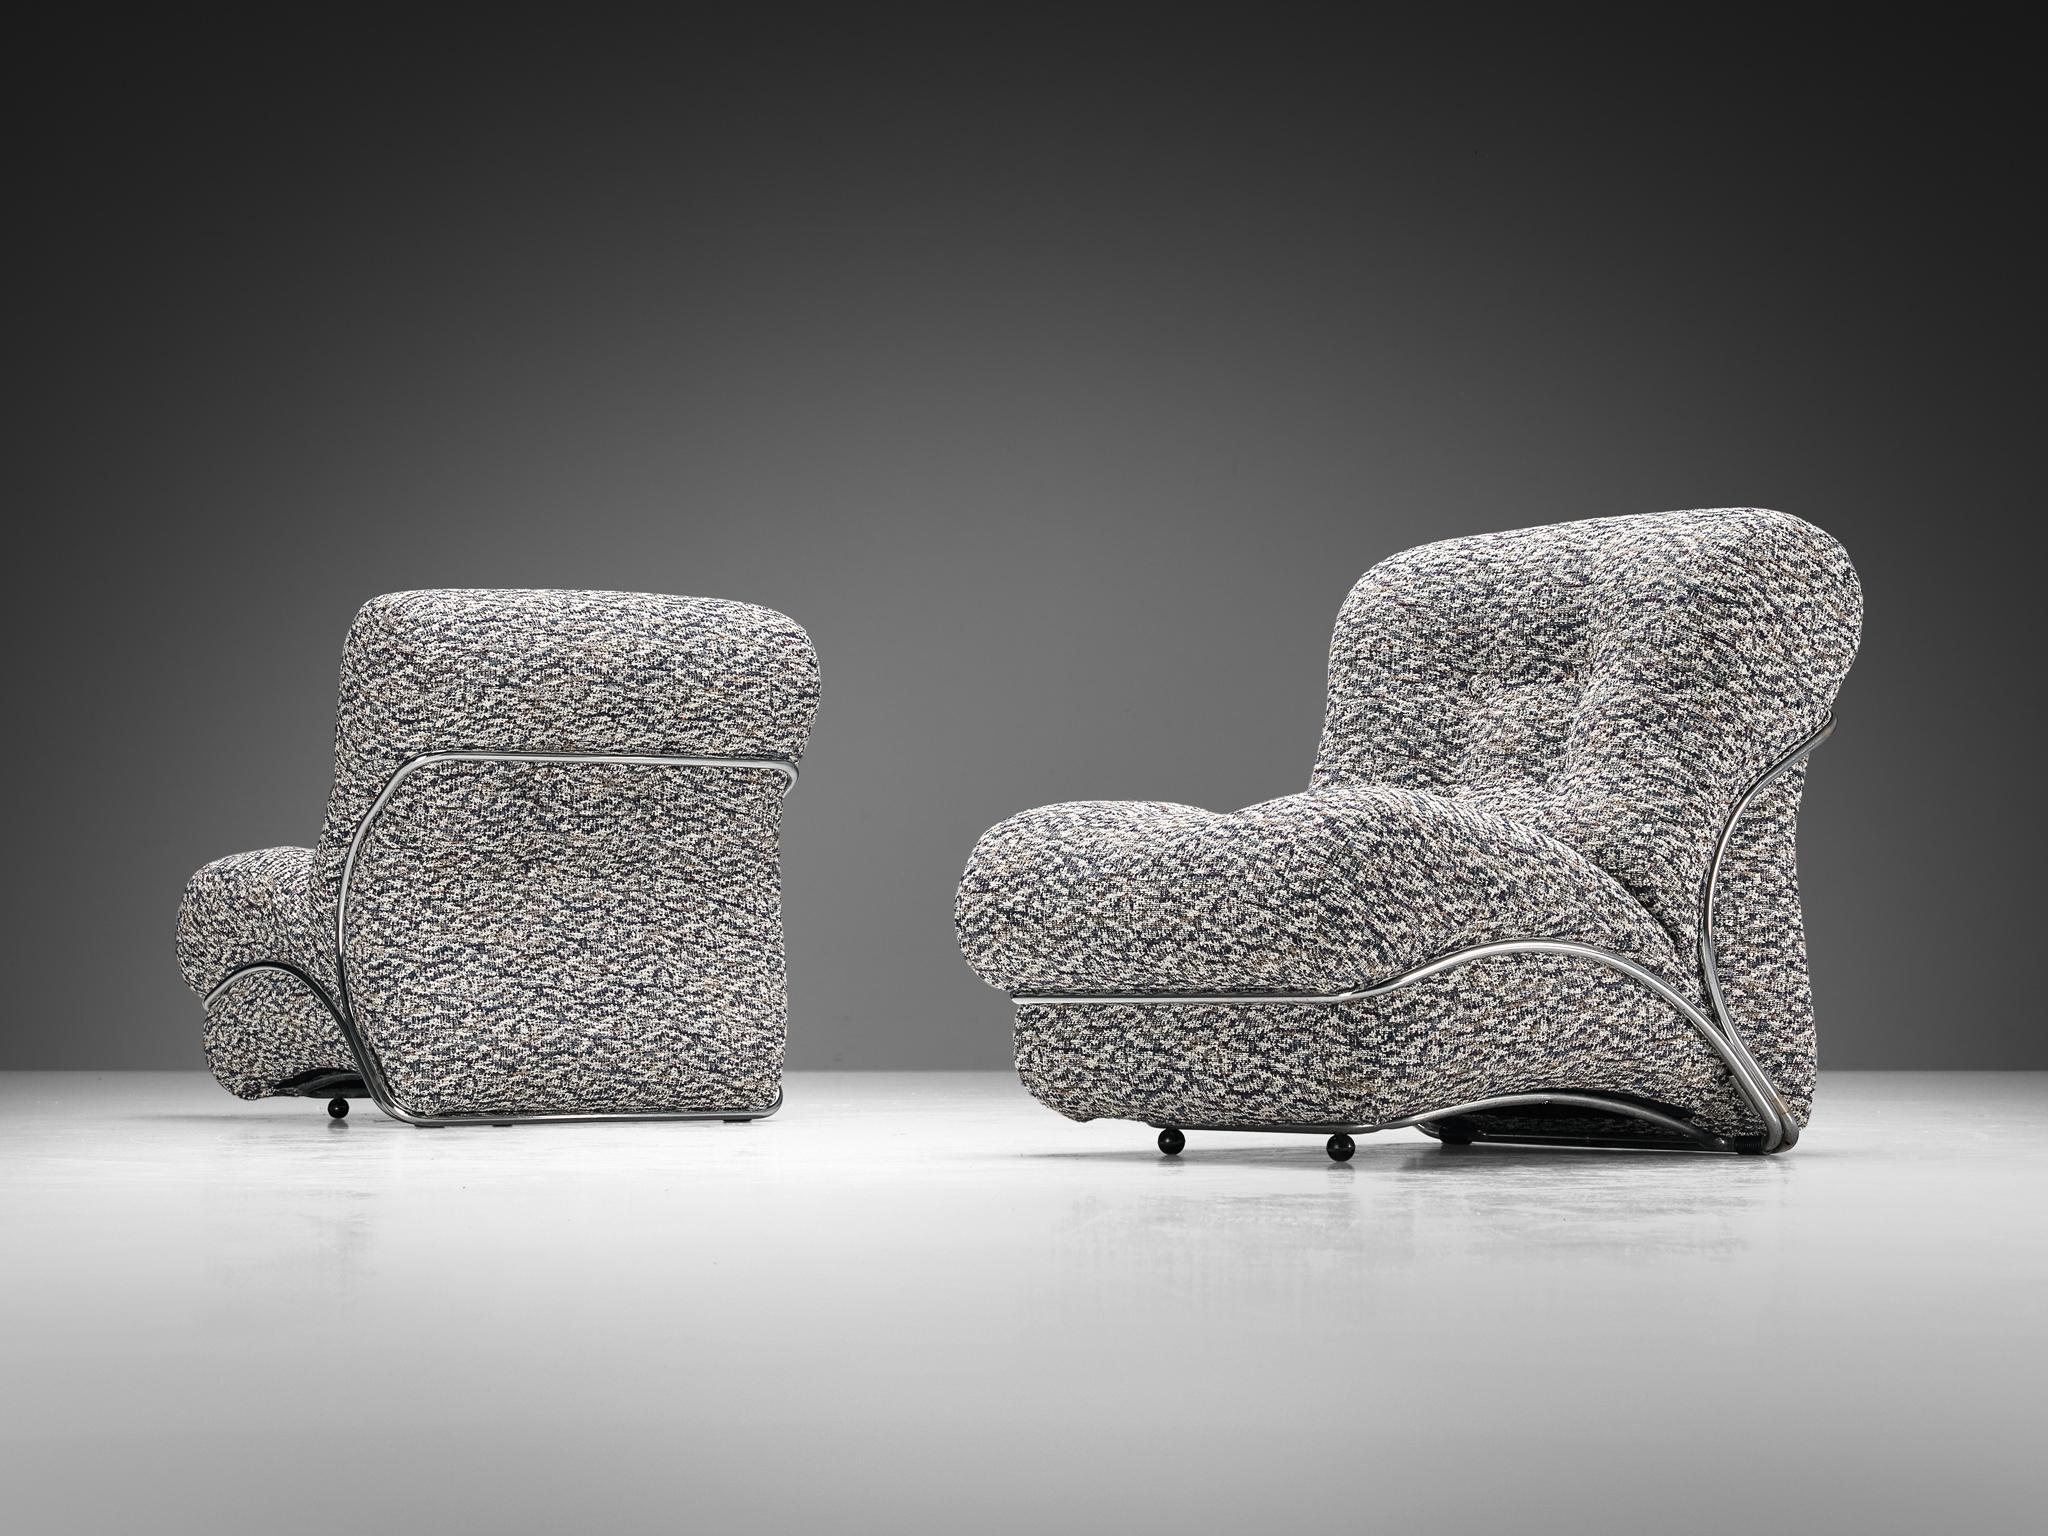 Metal I.P.E. Pair of 'Corolla' Lounge Chairs in Patterned Upholstery  For Sale